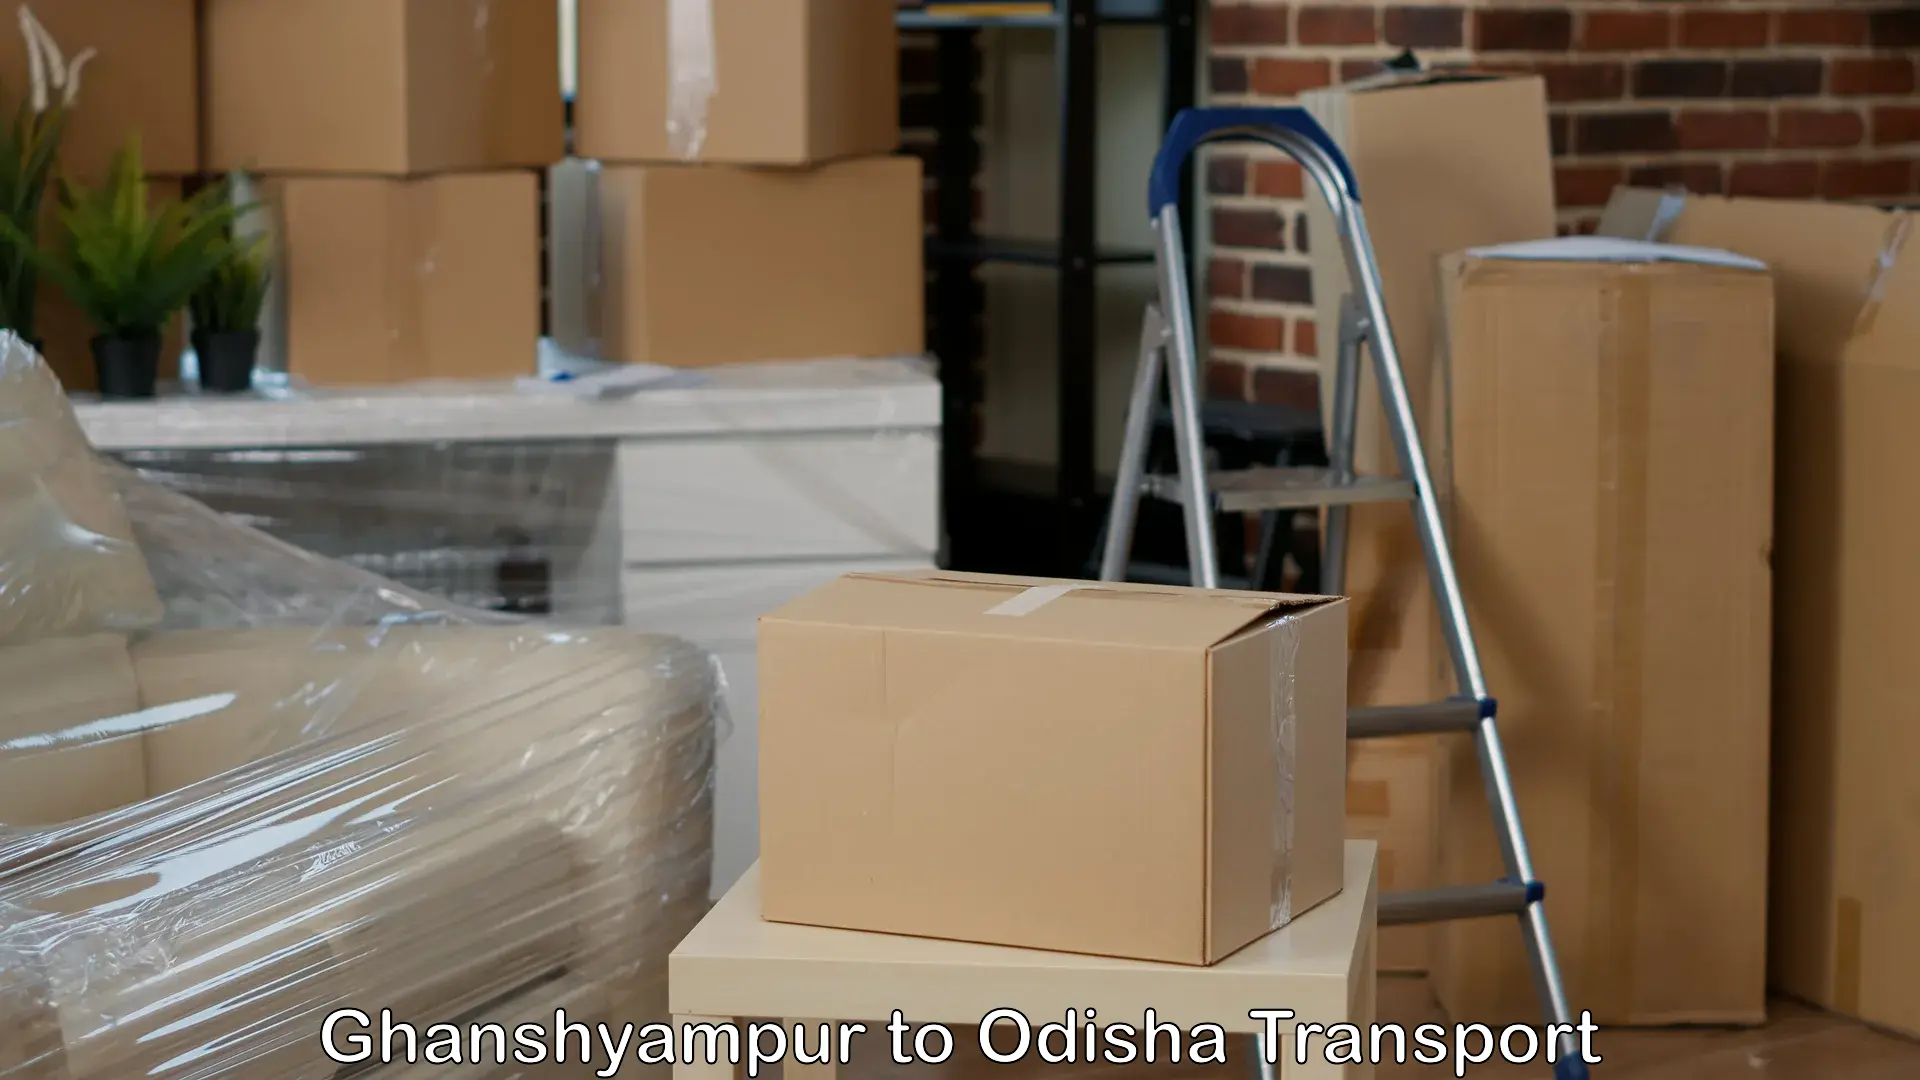 Cargo transport services in Ghanshyampur to Dandisahi